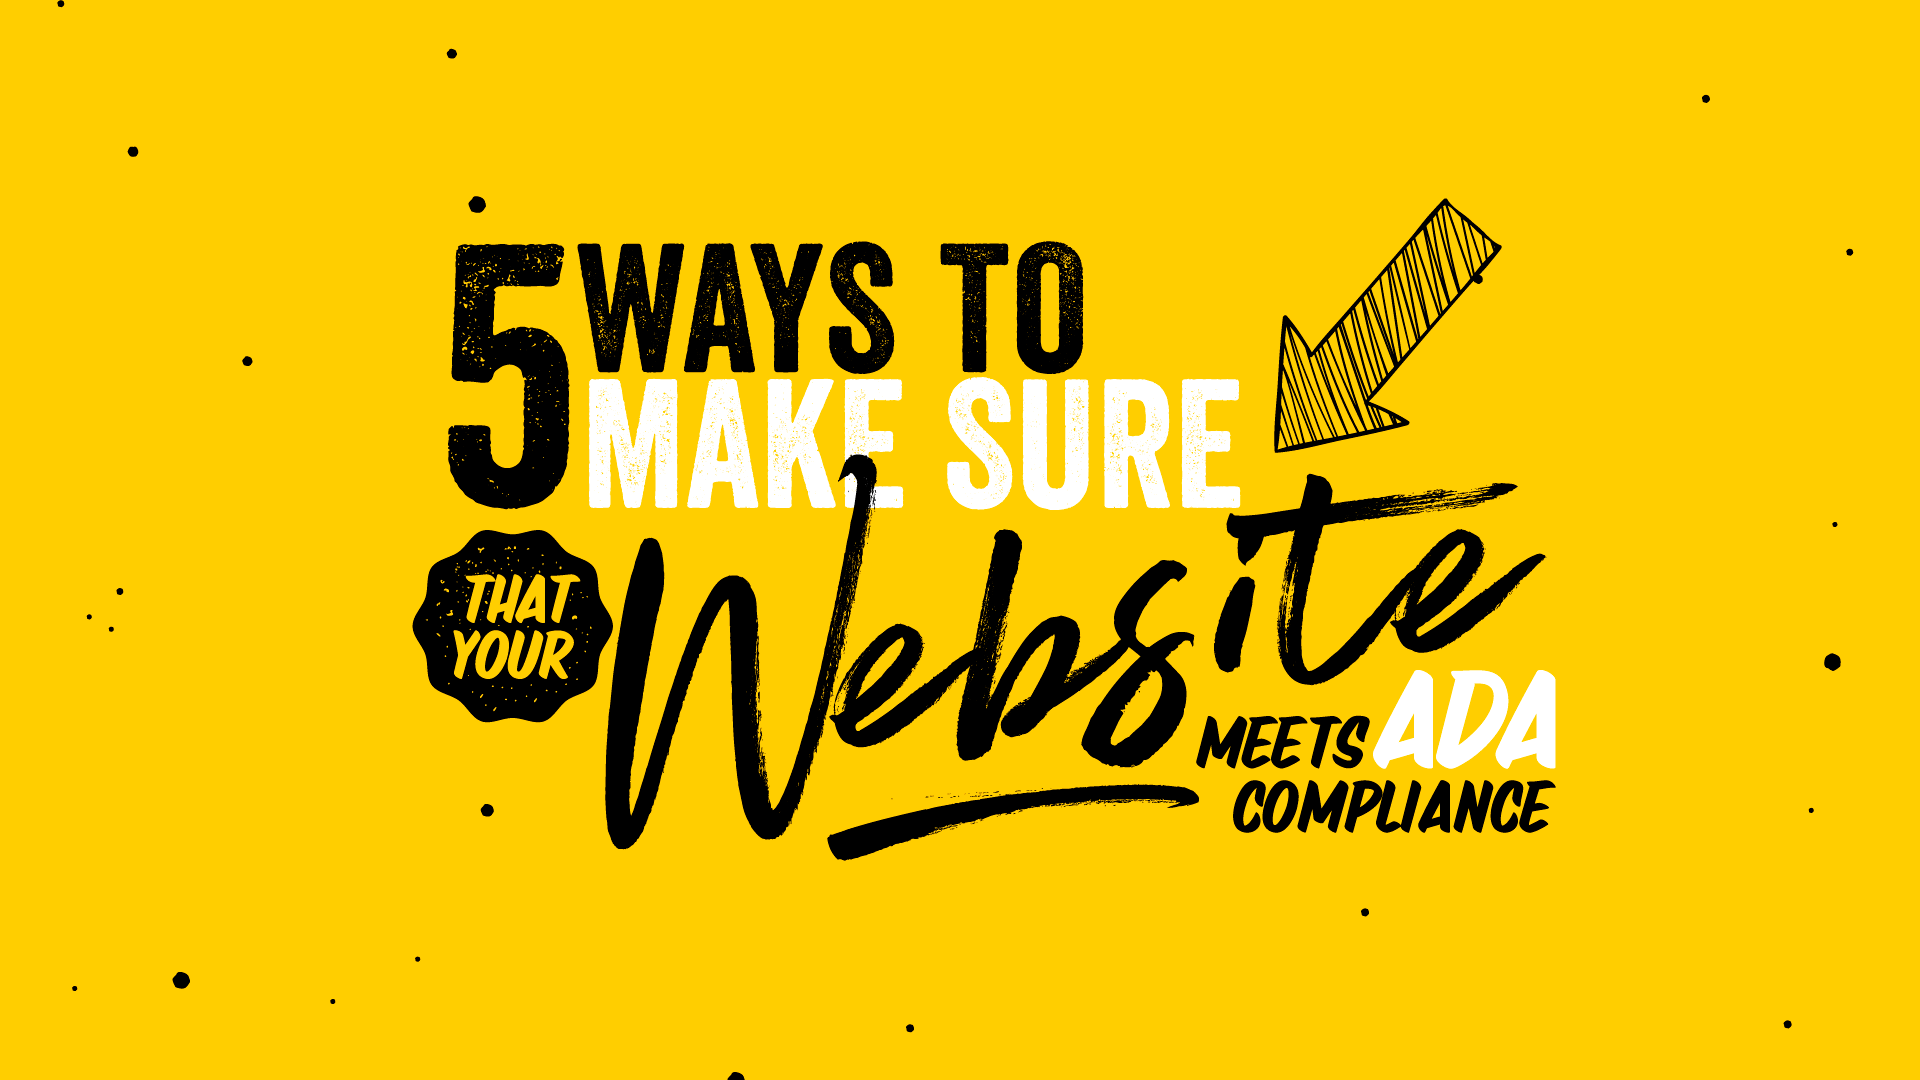 5 Ways to Make Sure that Your Website Meets ADA Compliance